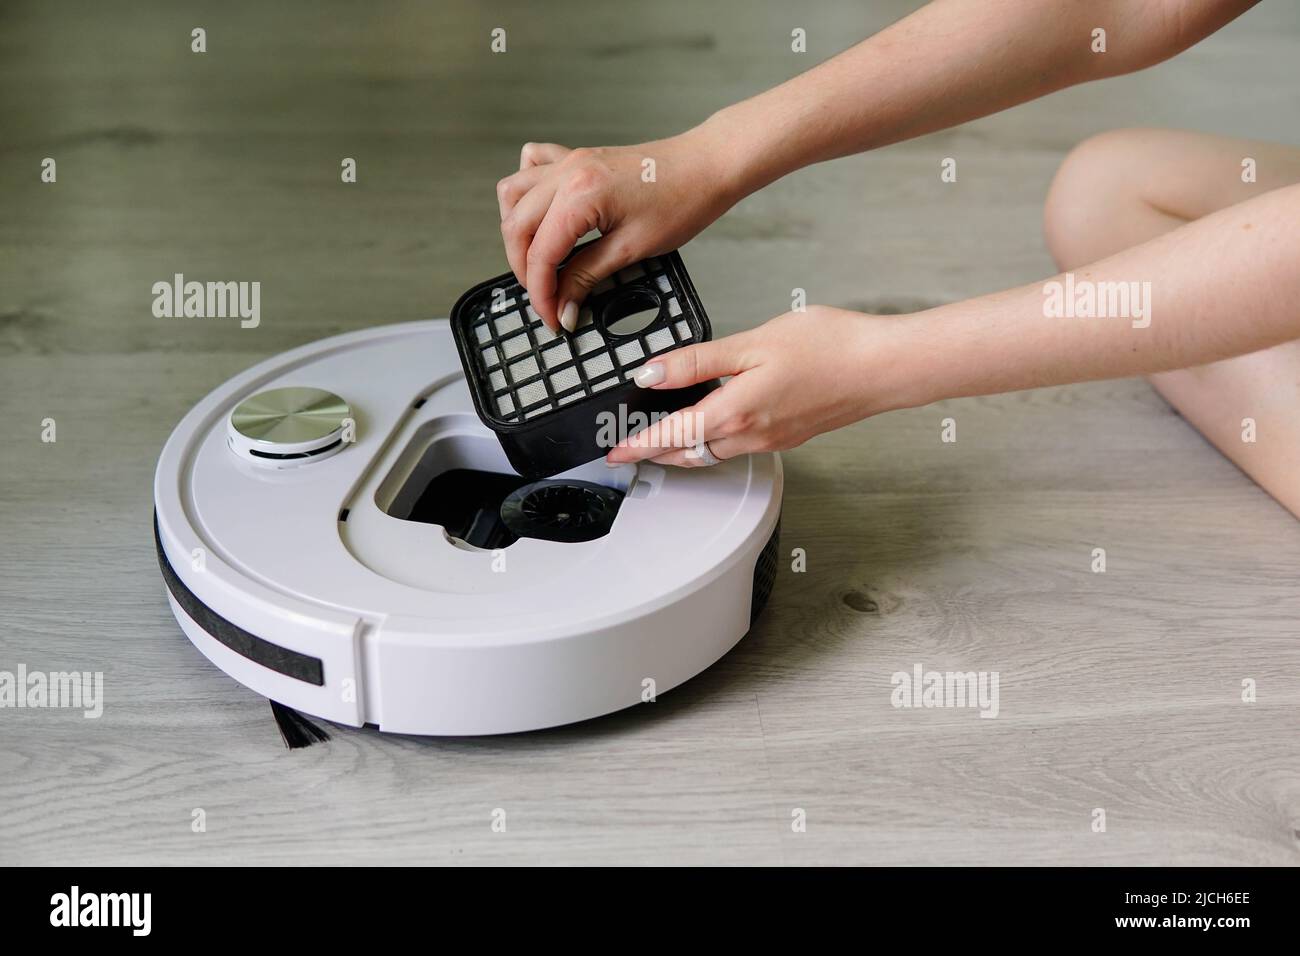 Young woman taking out container and filter of automatic robot vacuum cleaner to clean it from dirt and debris. Smart home technology. Stock Photo